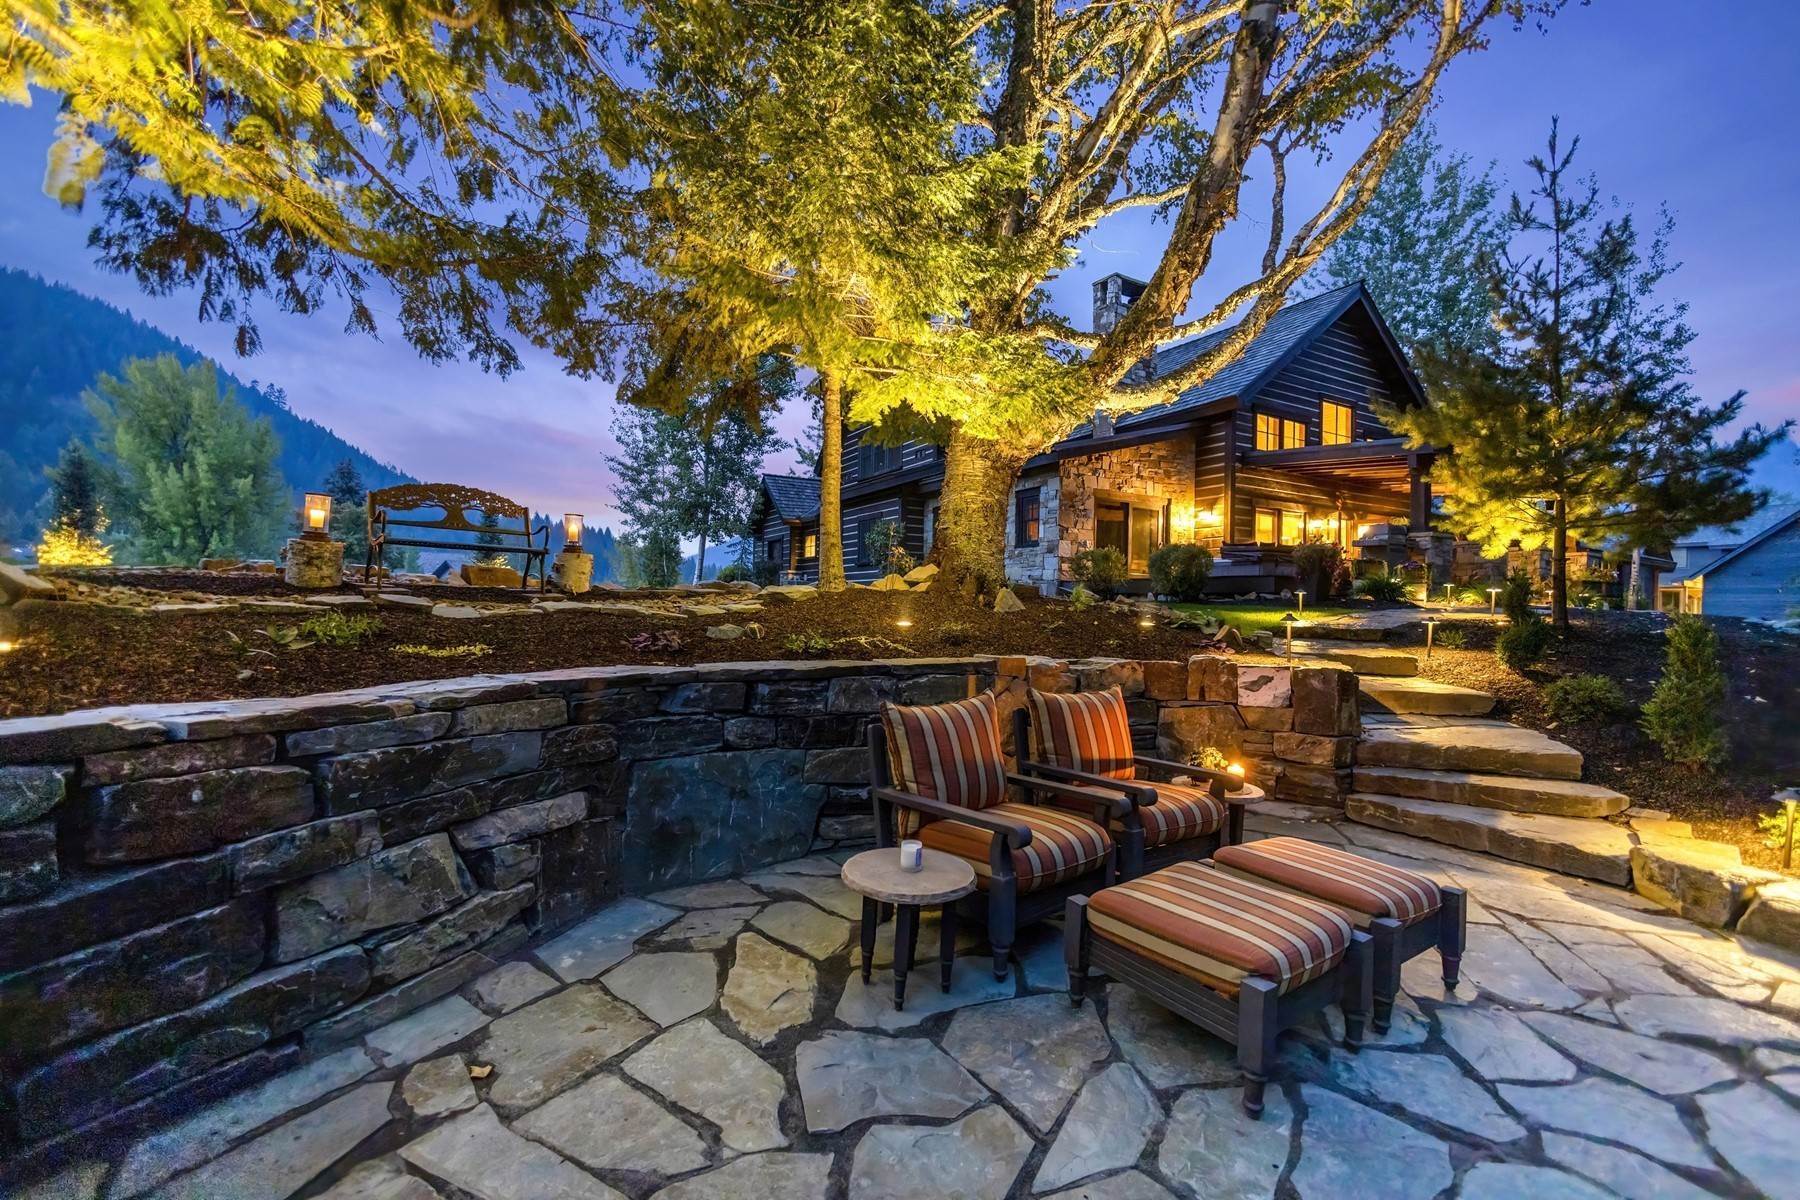 Single Family Homes for Sale at Spectacular Lodge Home -2 Parcels 356 Idaho Club Sandpoint, Idaho 83864 United States